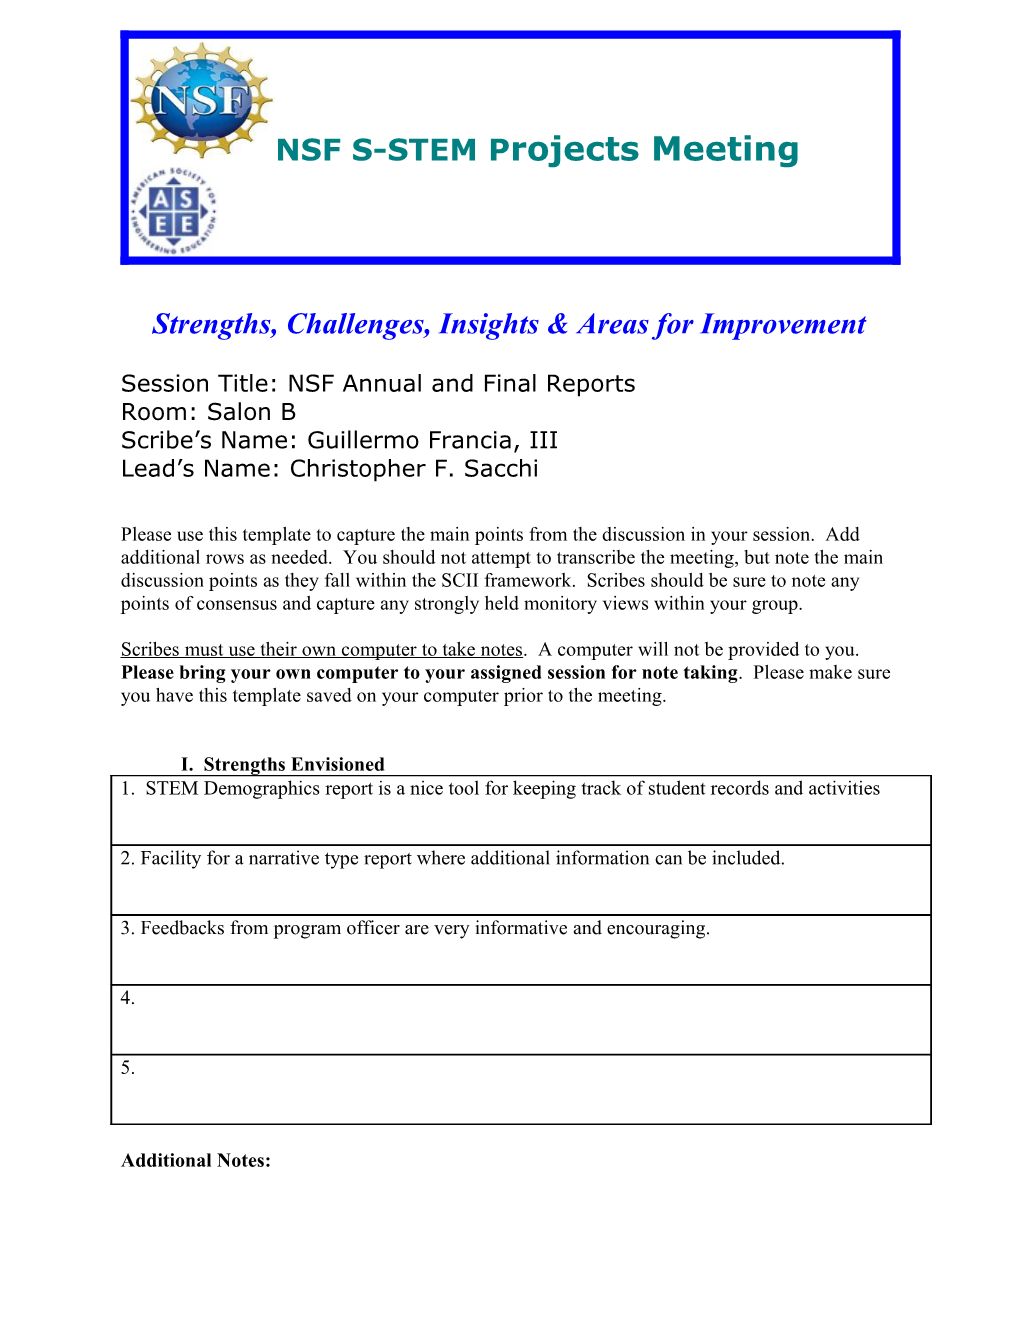 Strengths, Challenges, Insights & Areas for Improvement